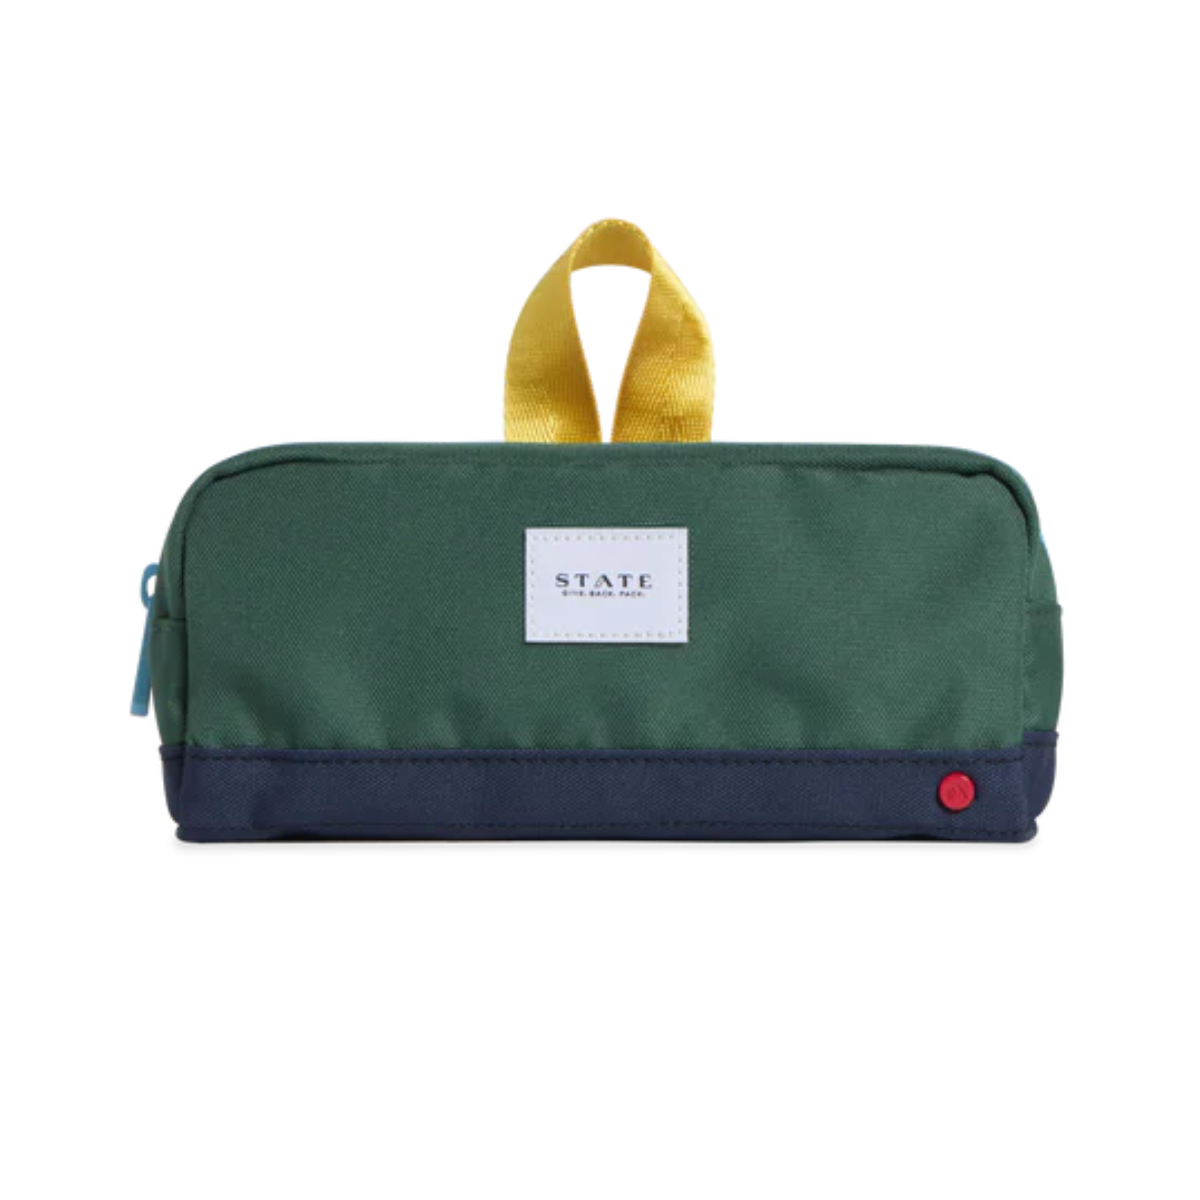 Clinton Pencil Case in Green & Navy by State